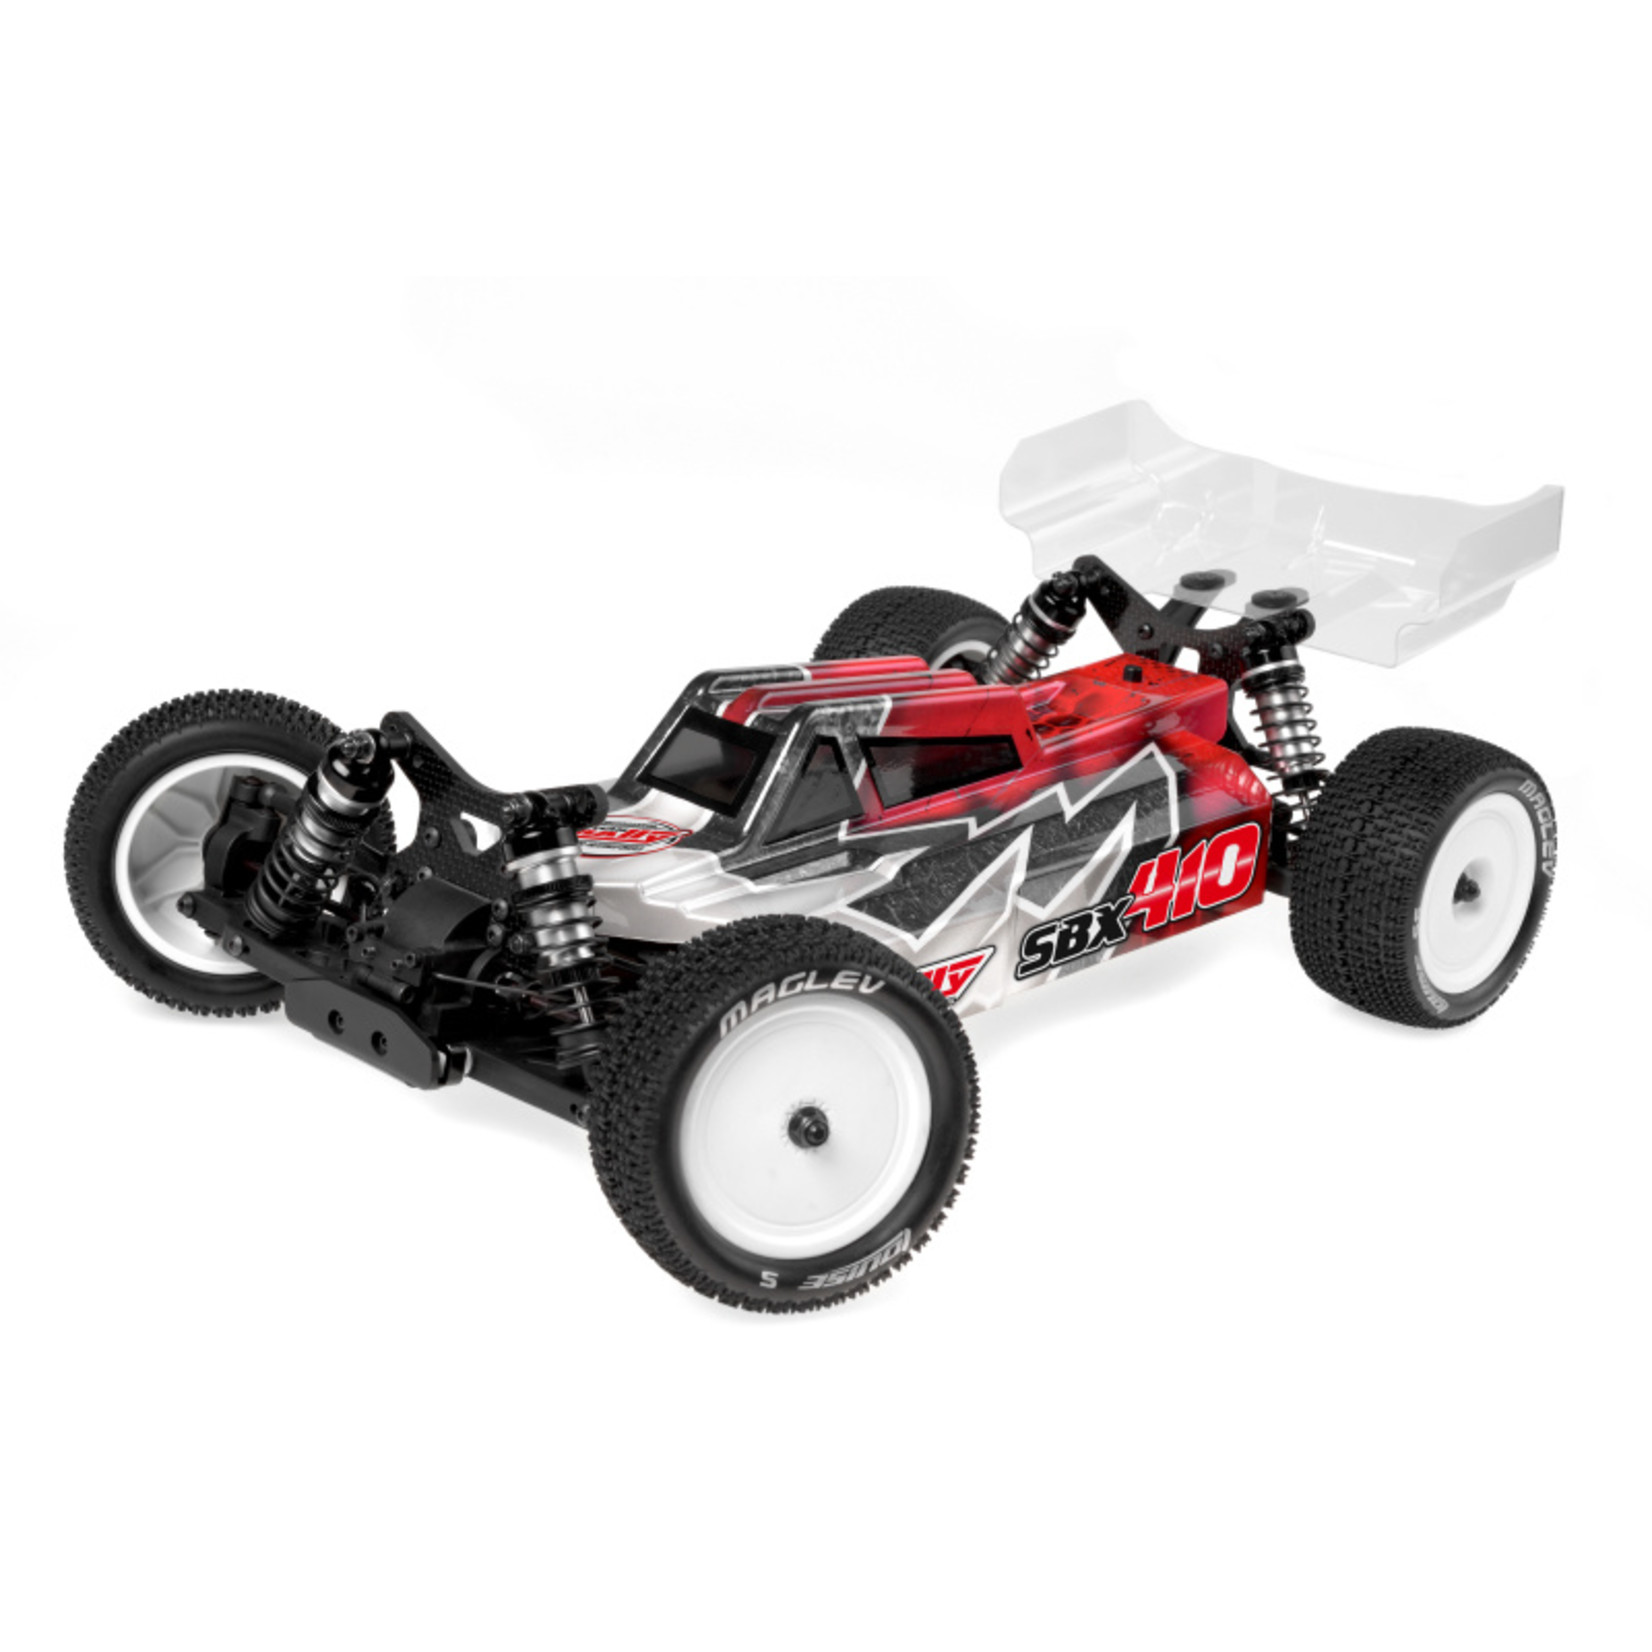 Corally (Team Corally) 1/10 SBX-410 4WD Off Road Competition Buggy Kit (No